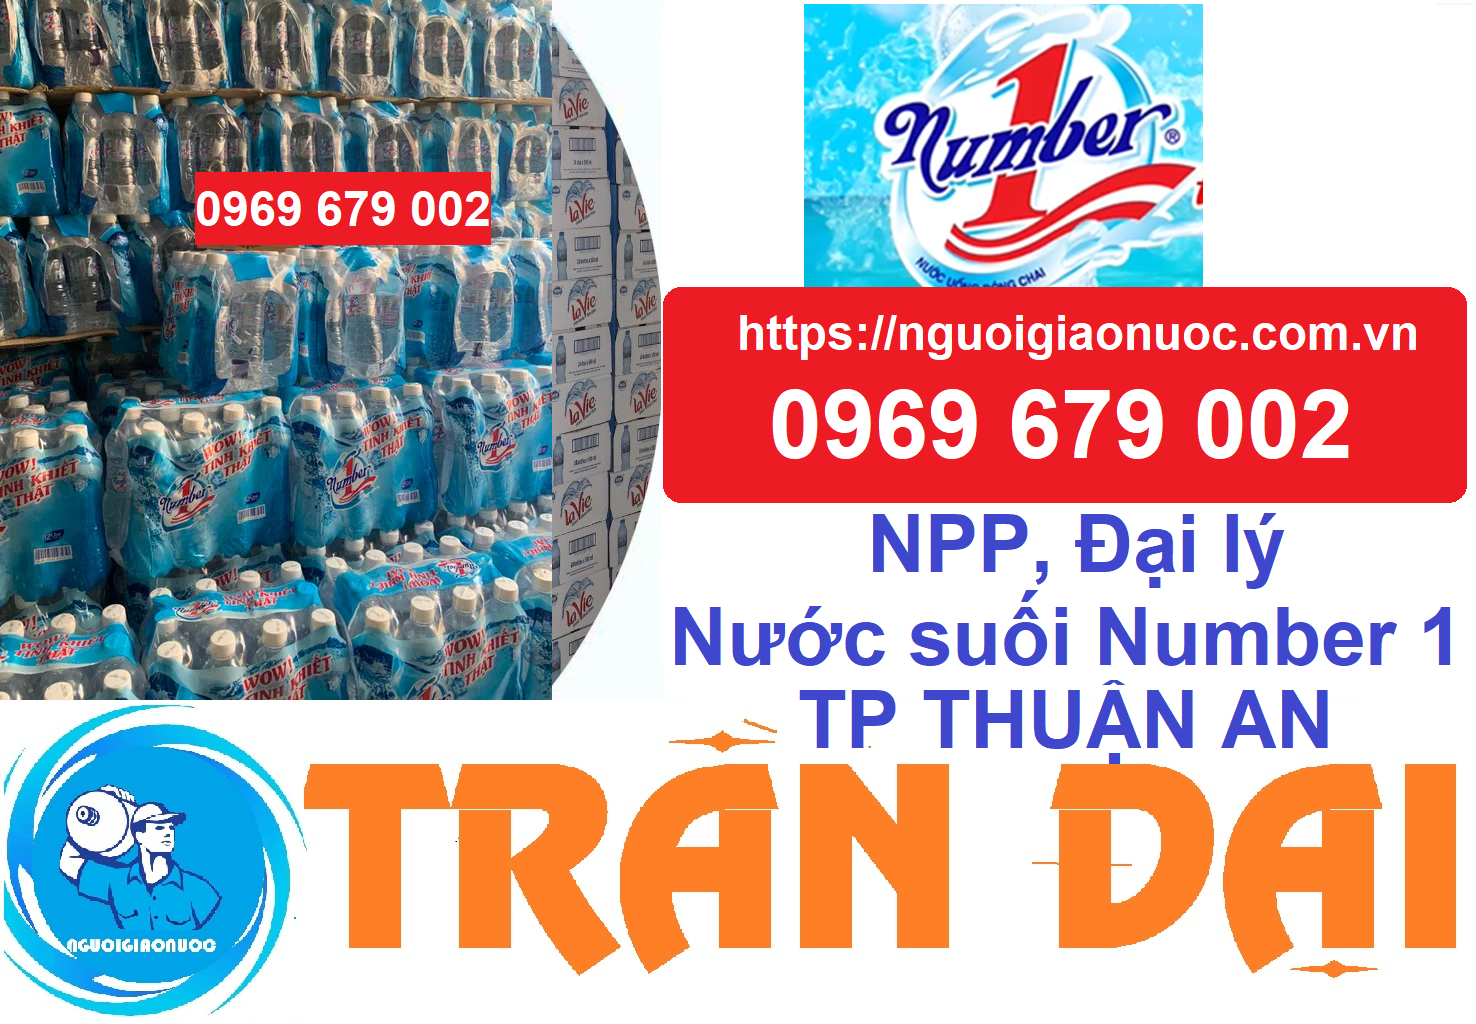 dai ly nuoc suoi number 1 thuan an